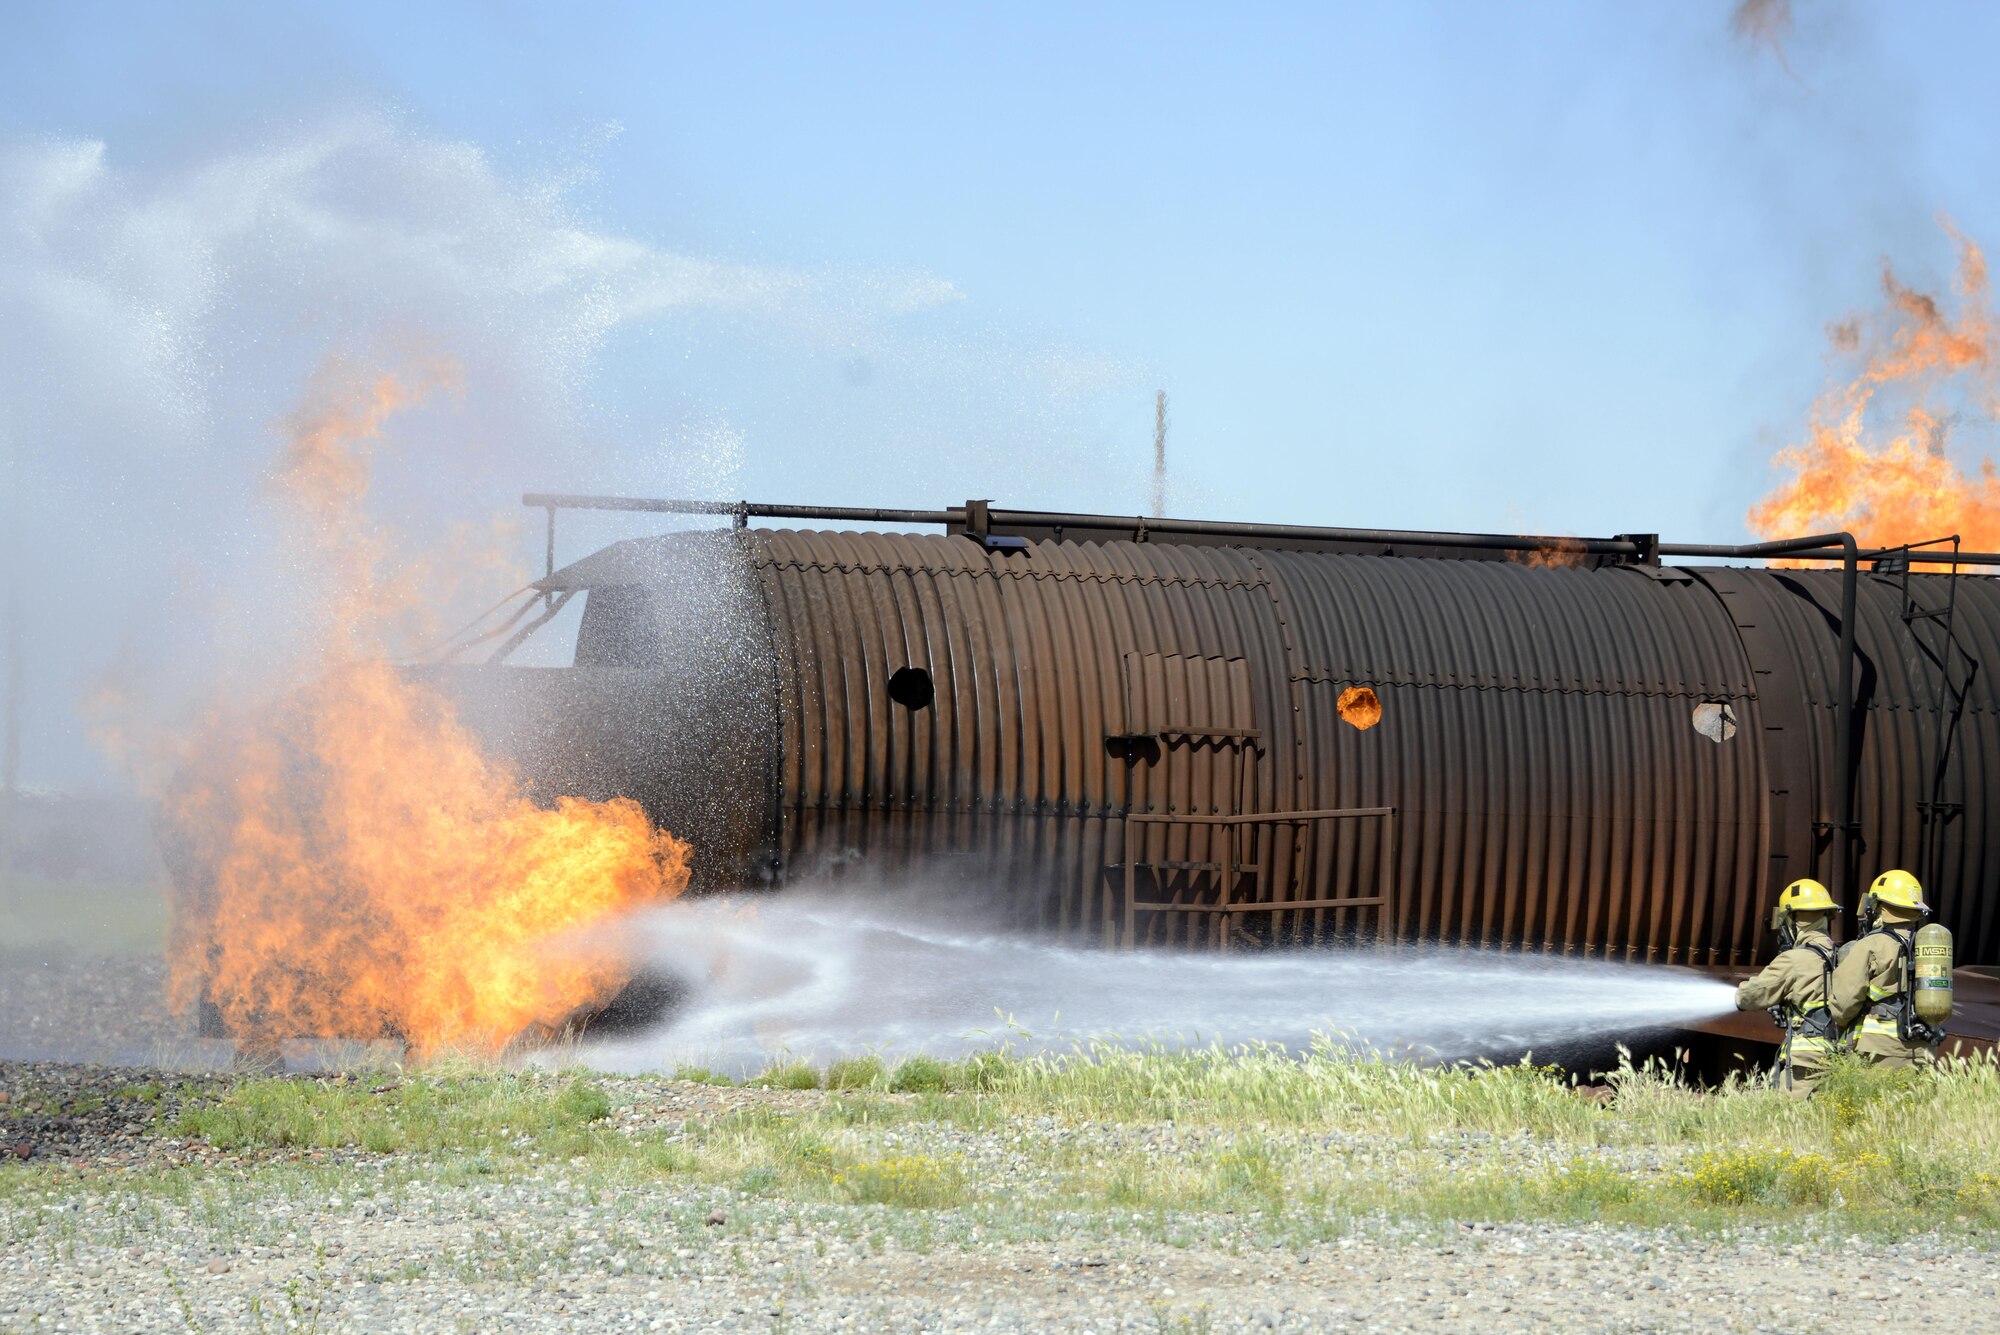 Members of the Scottsdale Fire Department spray water onto a fire during a joint training exercise Mar. 16, 2017, at Luke Air Force Base, Ariz. The objective of the exercise was to control the means of egress and evacuate victims while stabilizing the fire. (U.S. Air Force photo by Senior Airman Devante Williams)  